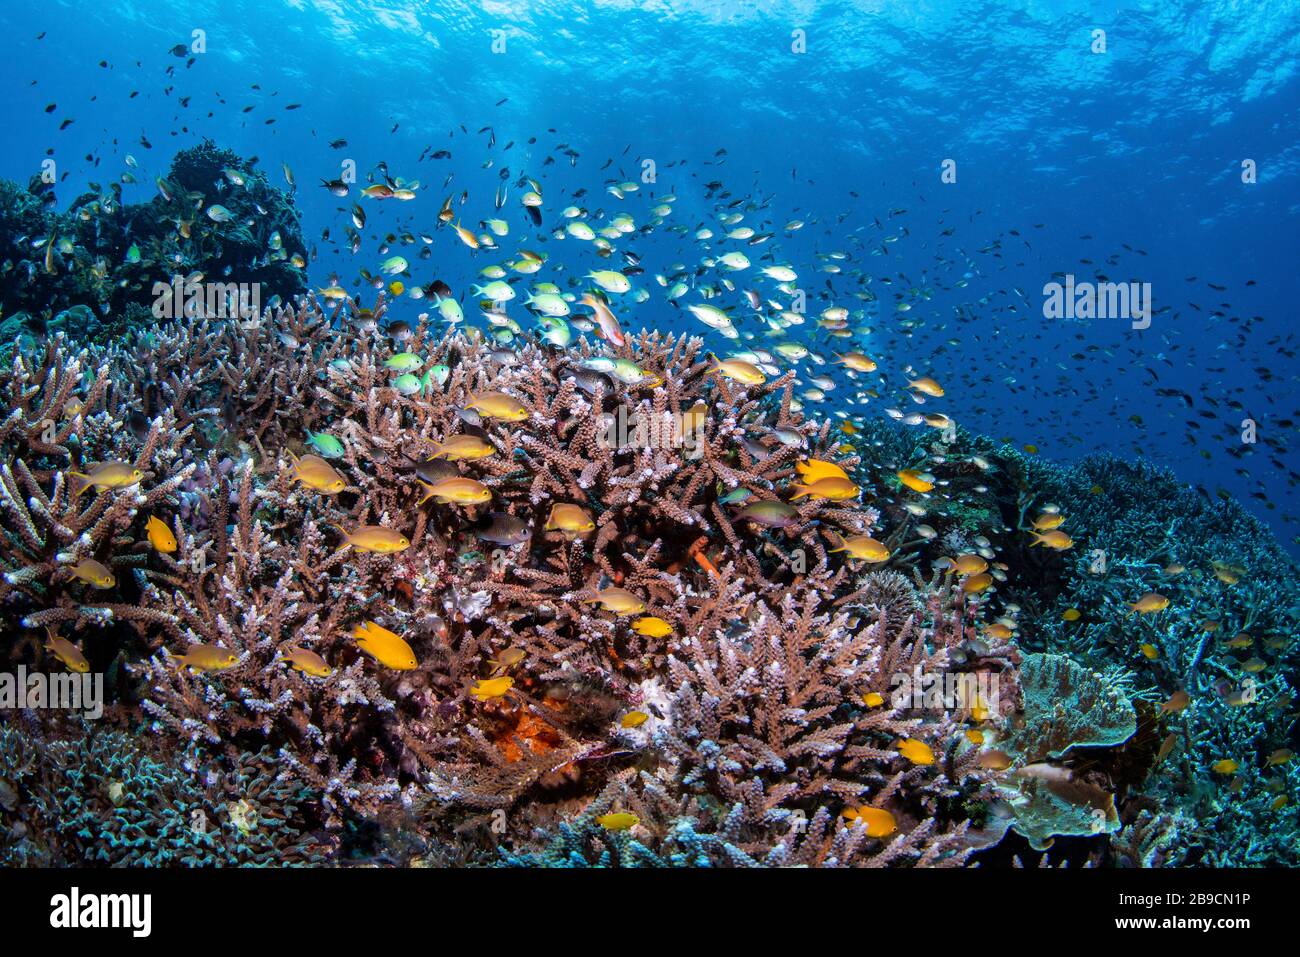 This hard coral reef is a great example of a healthy ecosystem. Stock Photo